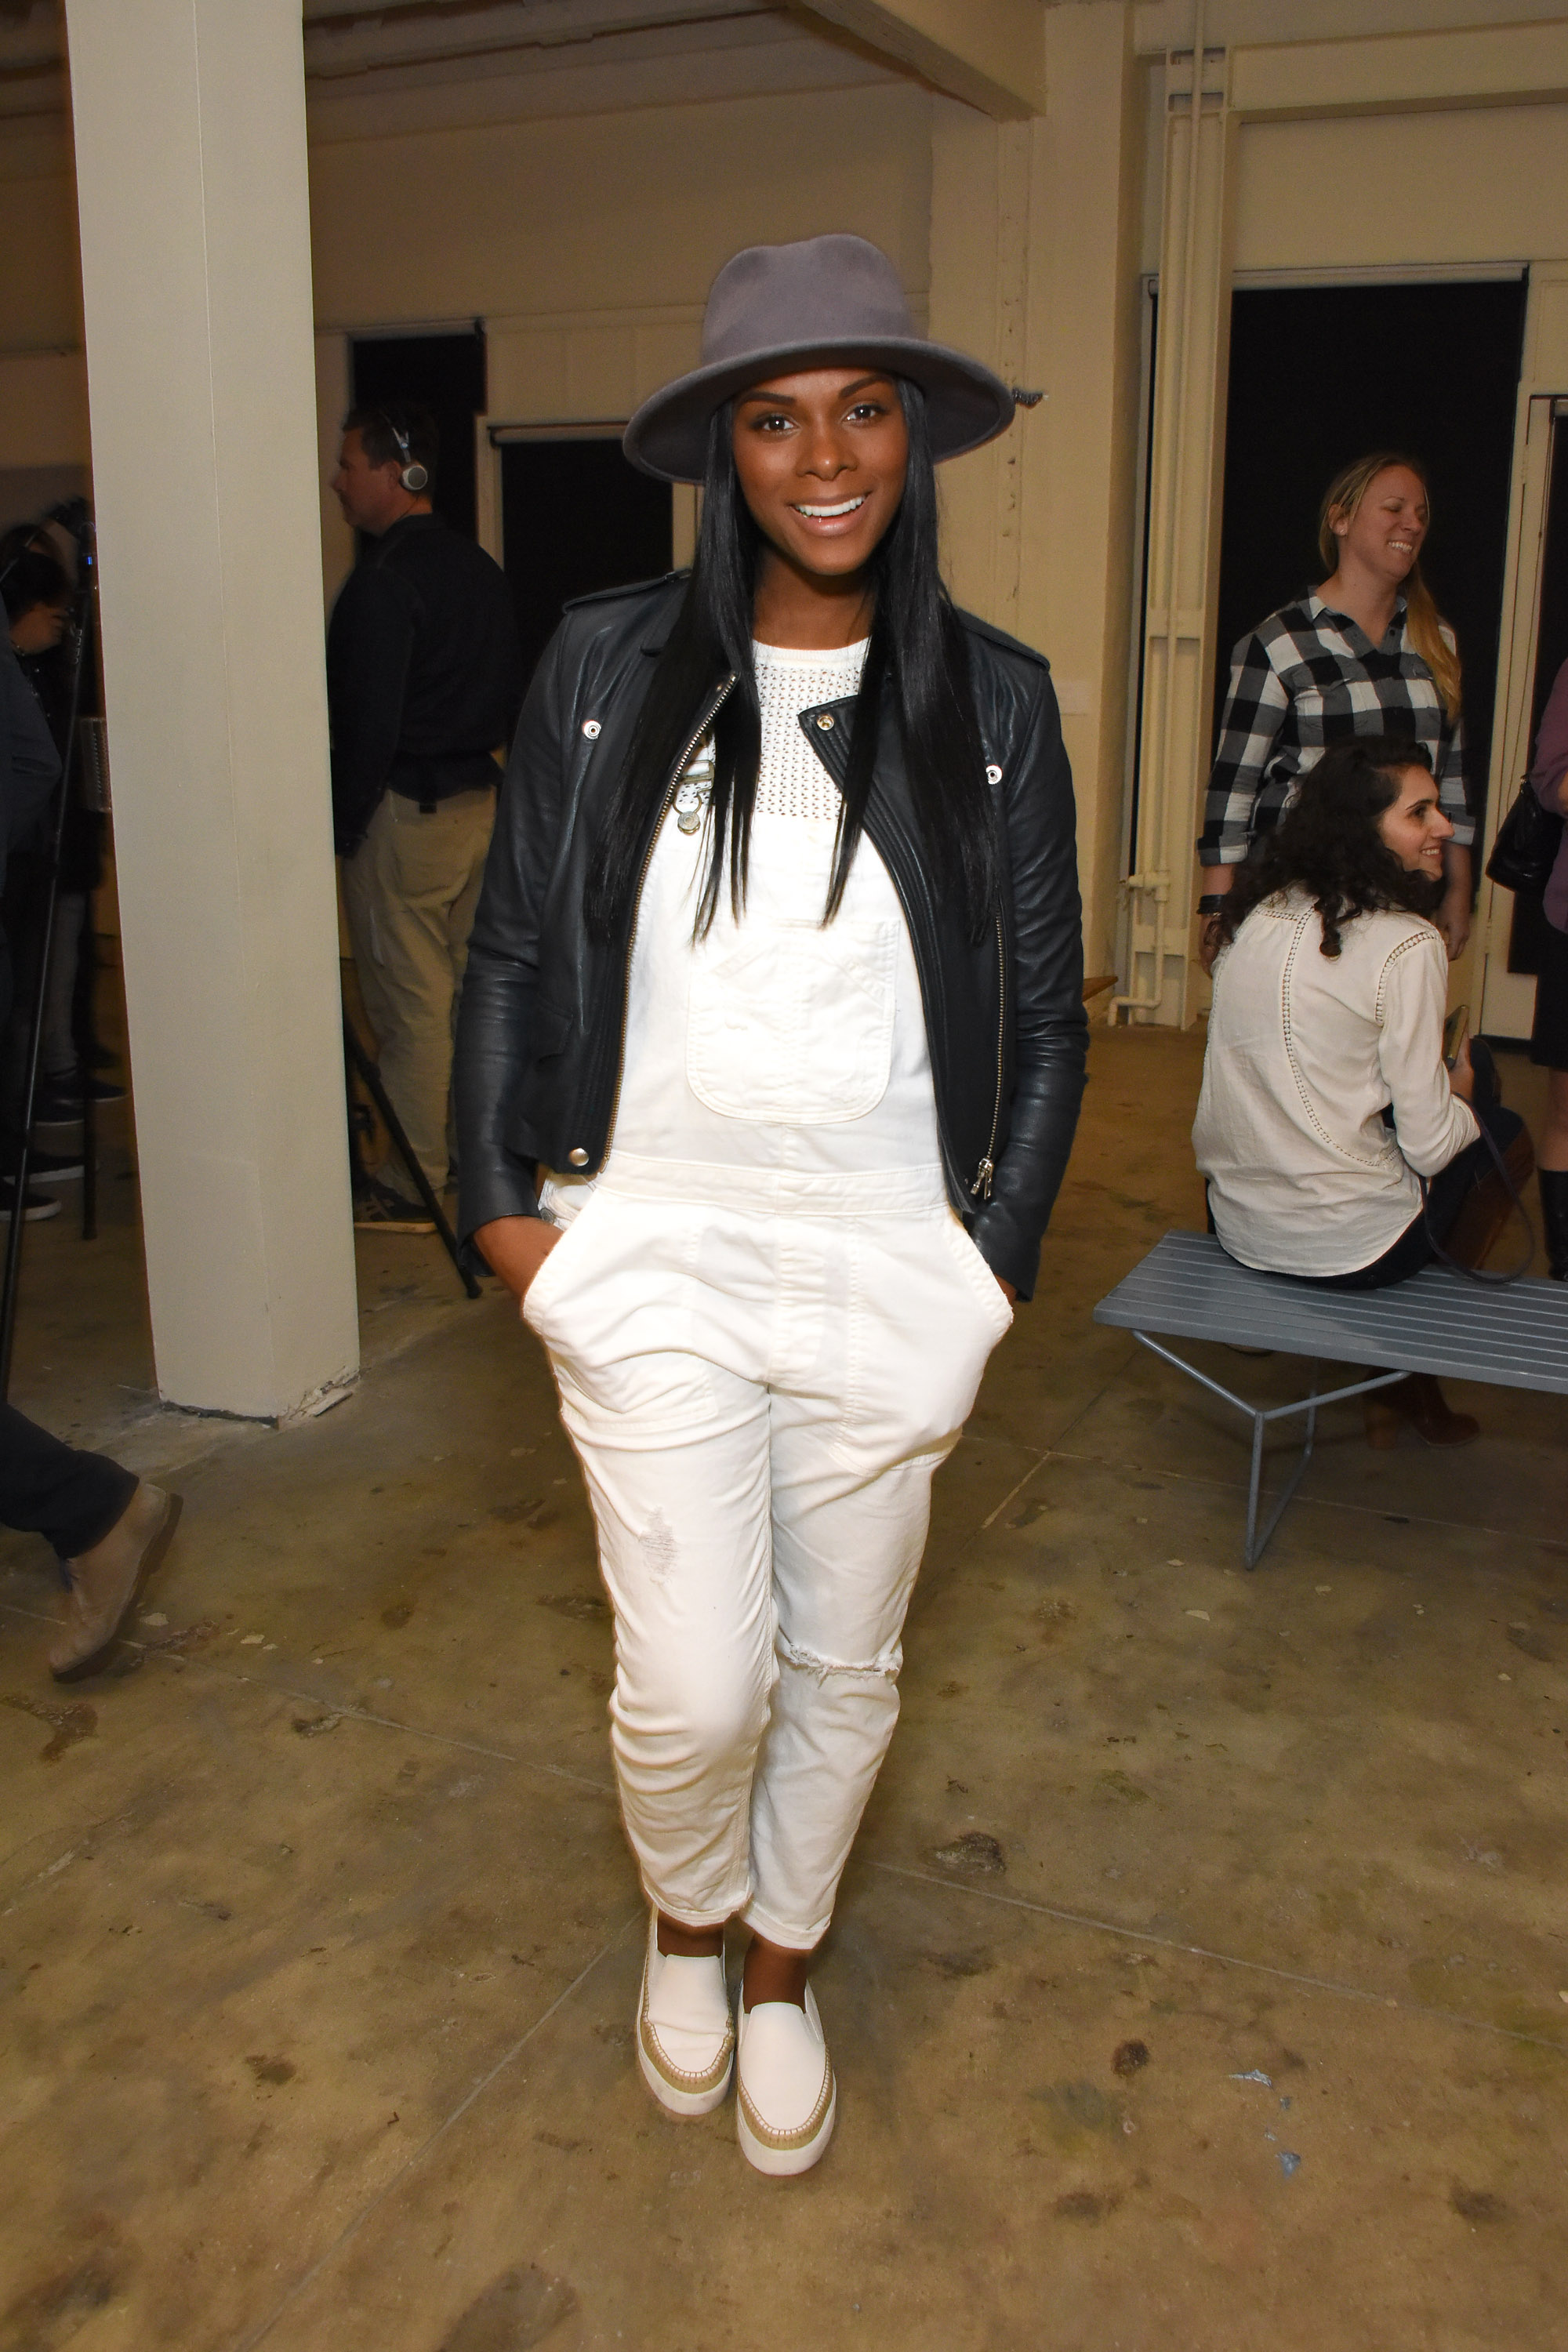 Tika Sumpter attends the John Legend performance at The Underground Museum for Belvedere DARKNESS AND LIGHT listening event on November 16, 2016 in Los Angeles, California.  